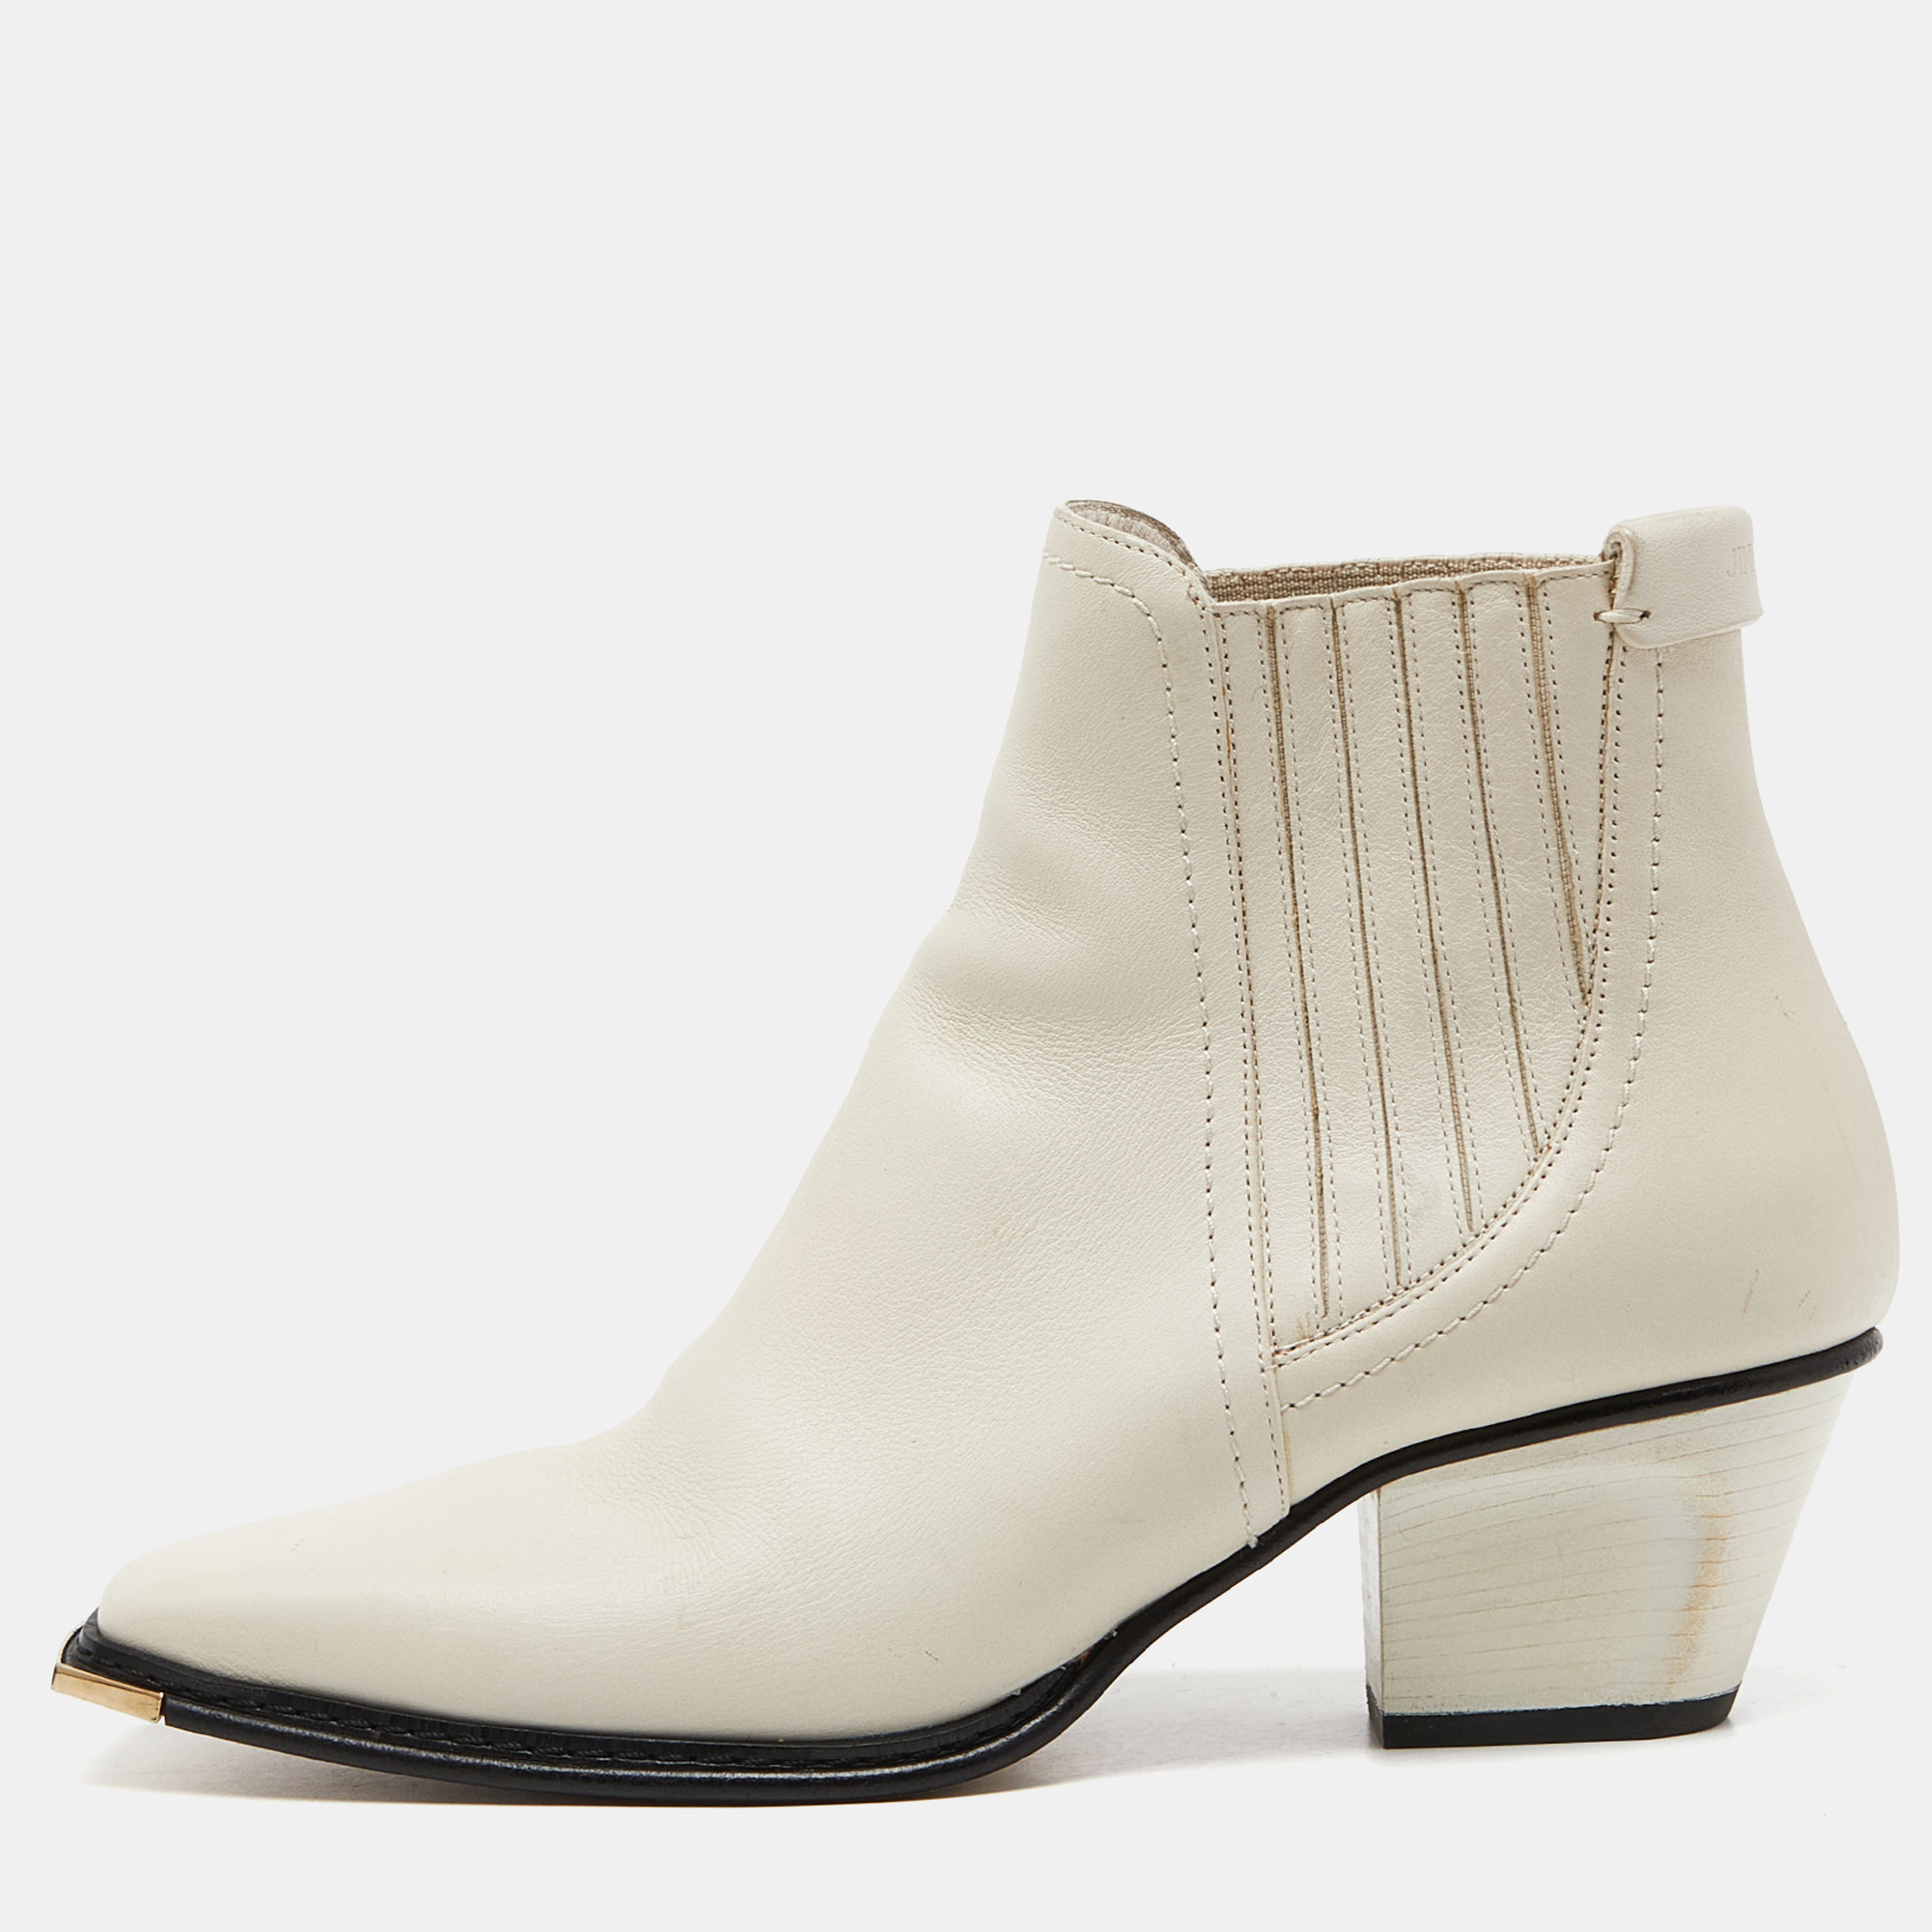 Jimmy choo off white leather ankle boots size 37